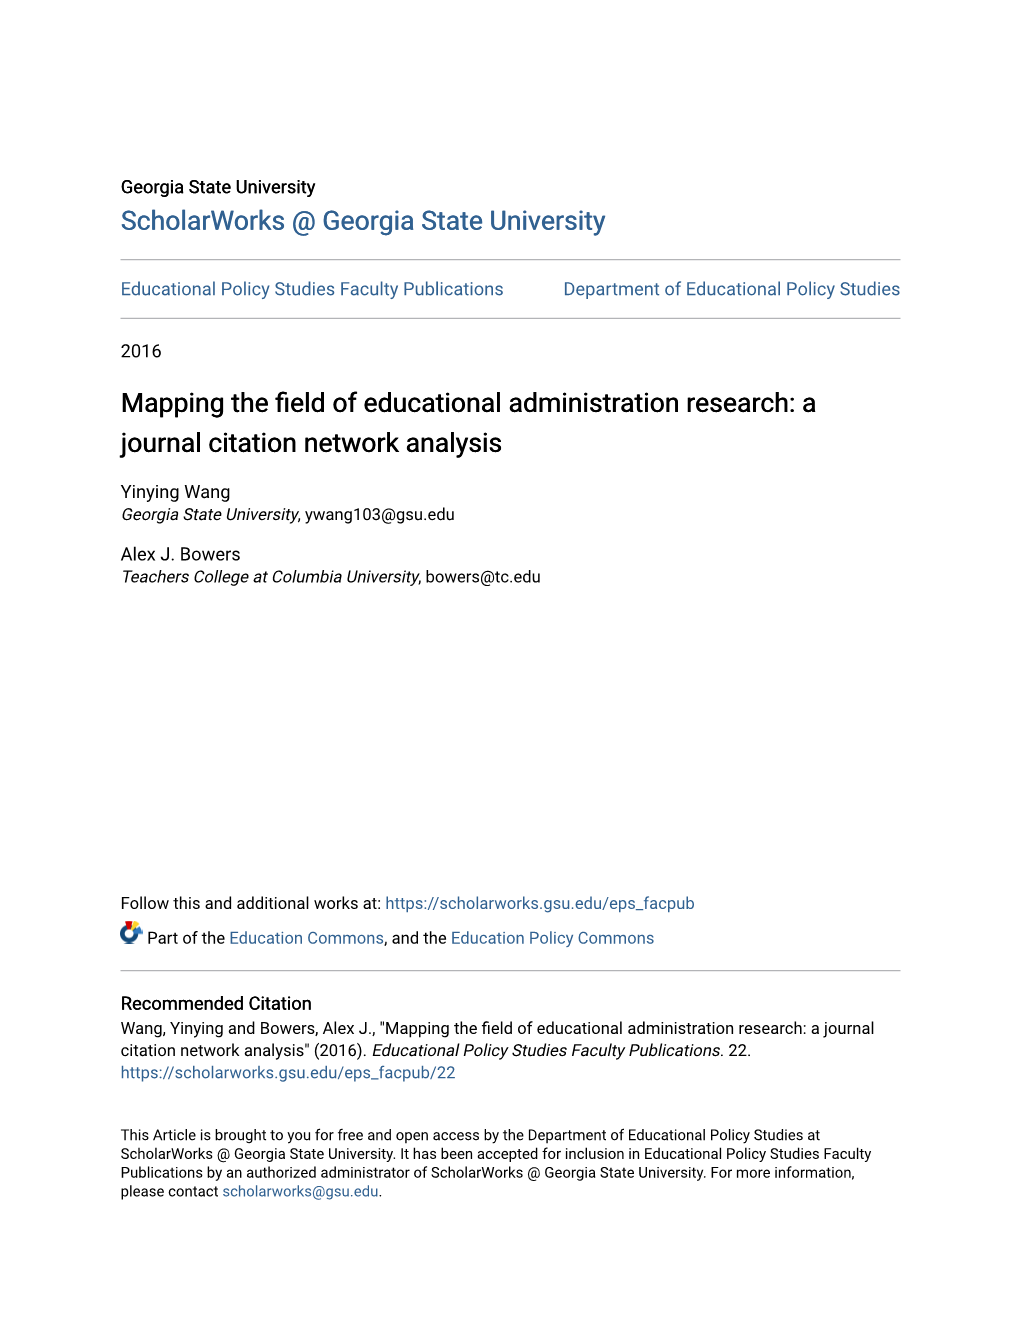 Mapping the Field of Educational Administration Research: a Journal Citation Network Analysis